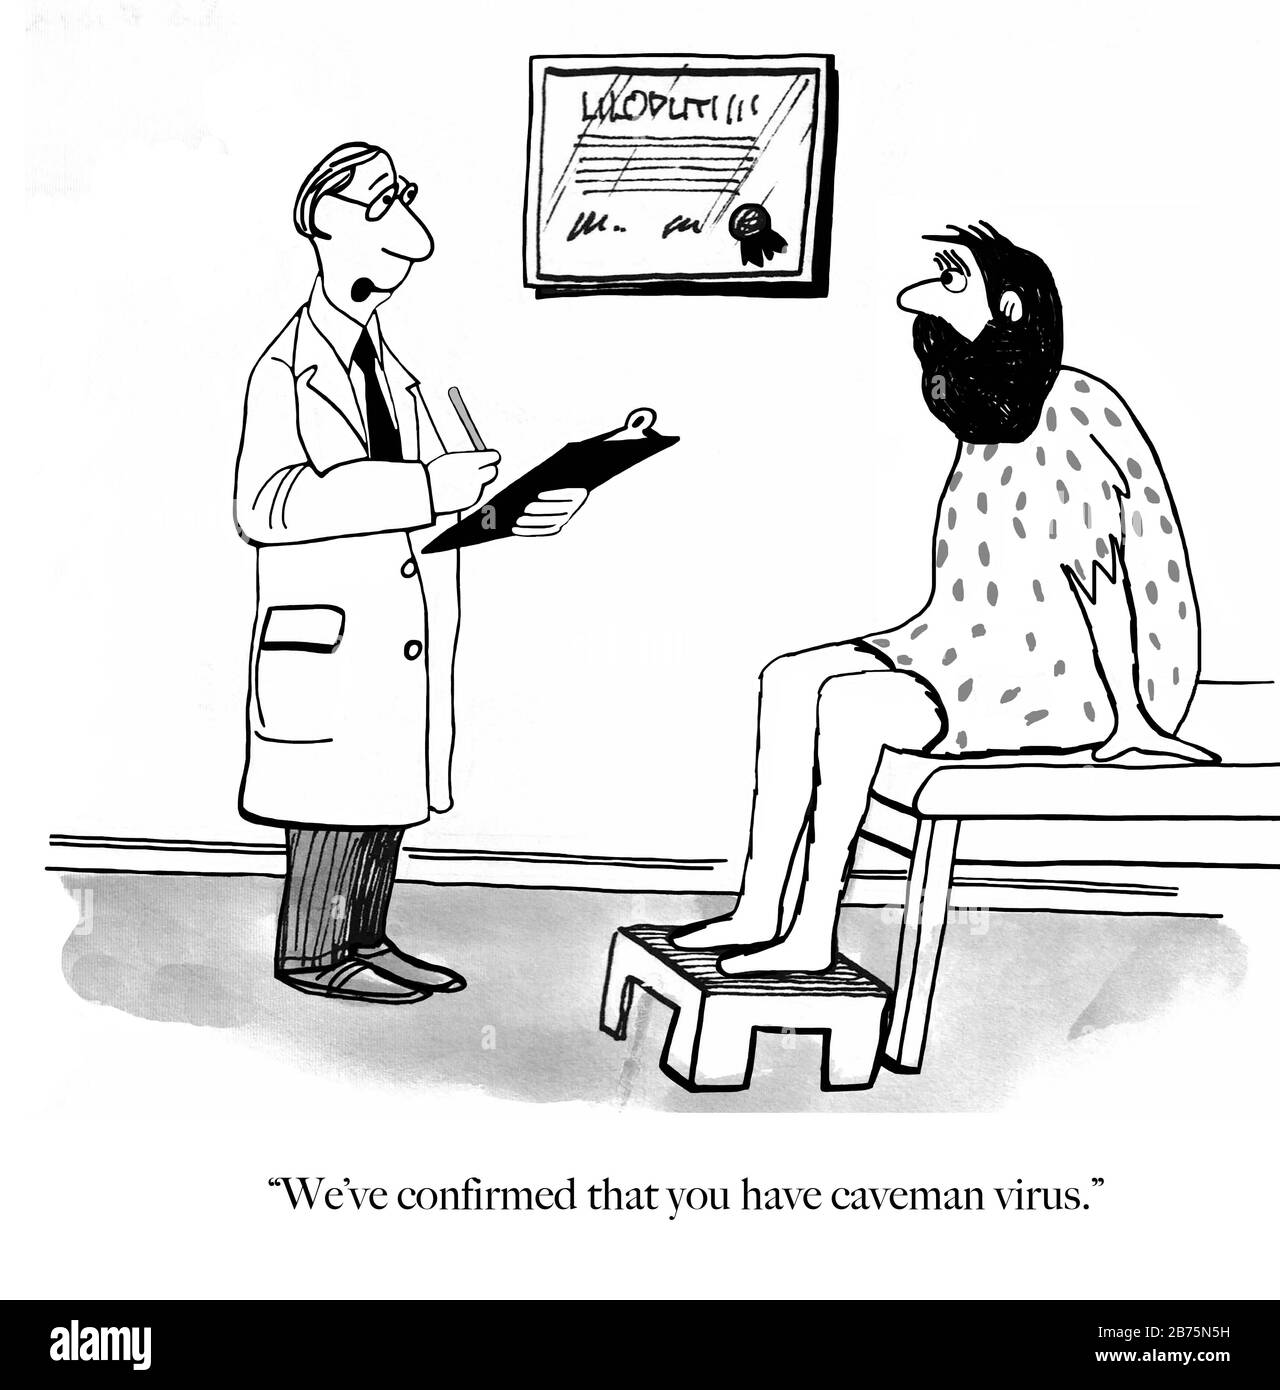 Doctor with test chart is informing patient who looks like cavemman that he does have the caveman virus Stock Photo